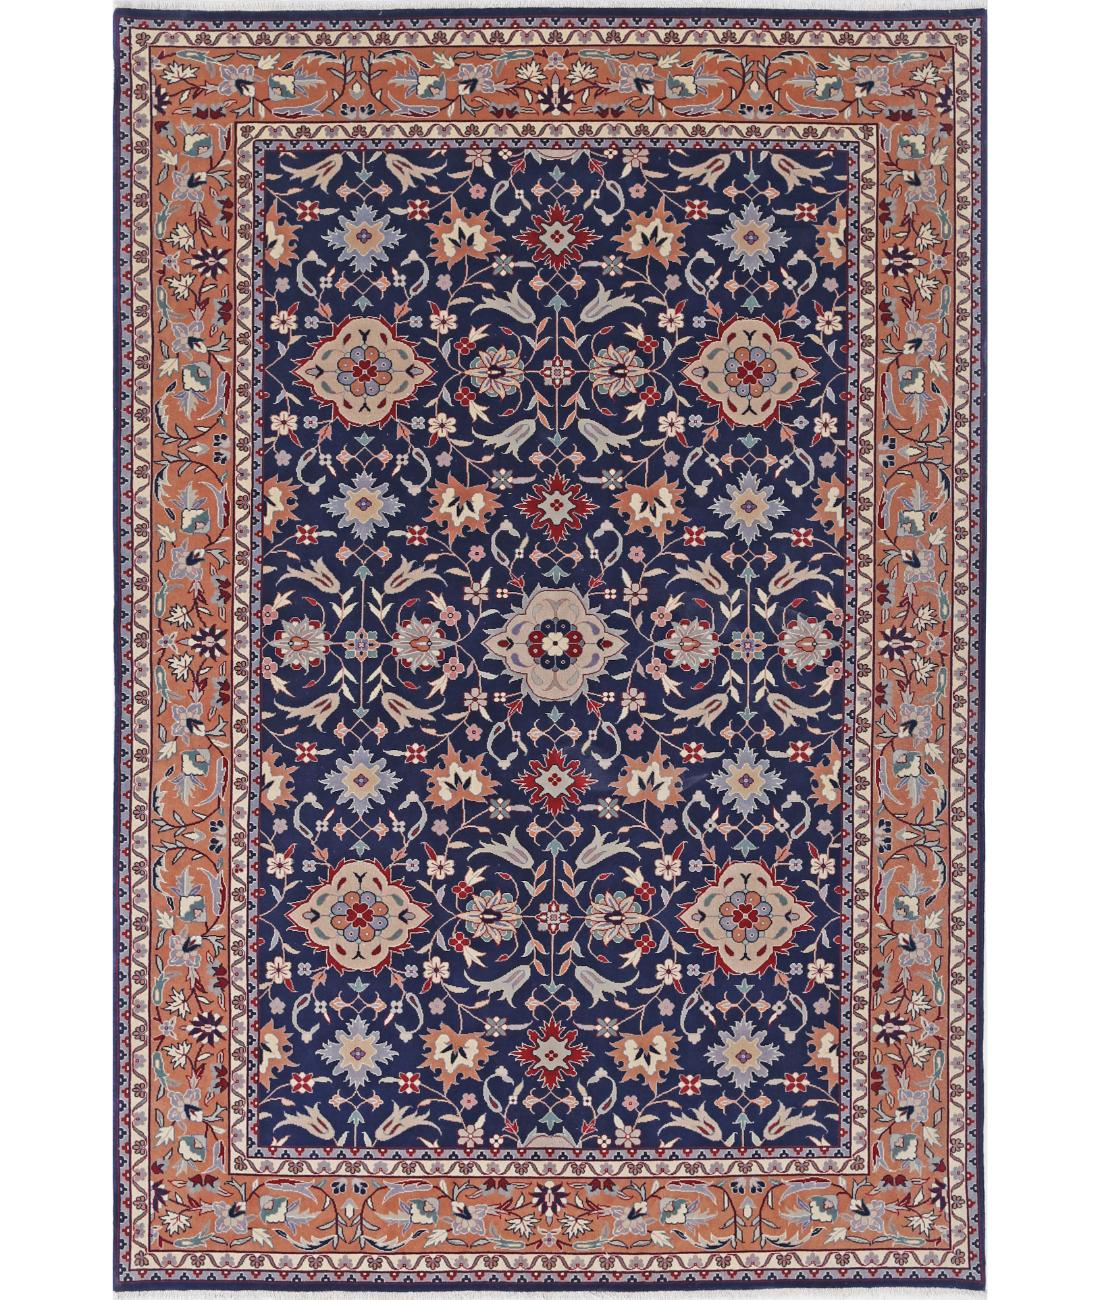 Hand Knotted Heritage Persian Style Wool Rug - 6'0'' x 9'0'' 6' 0" X 9' 0" (183 X 274) / Blue / Tan